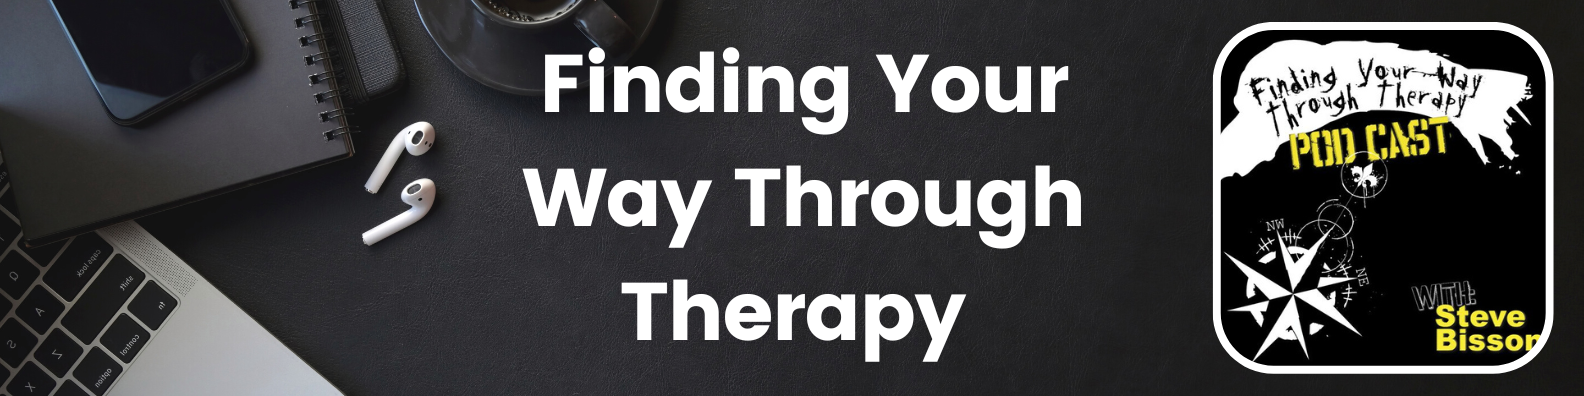 Finding Your way through Therapy